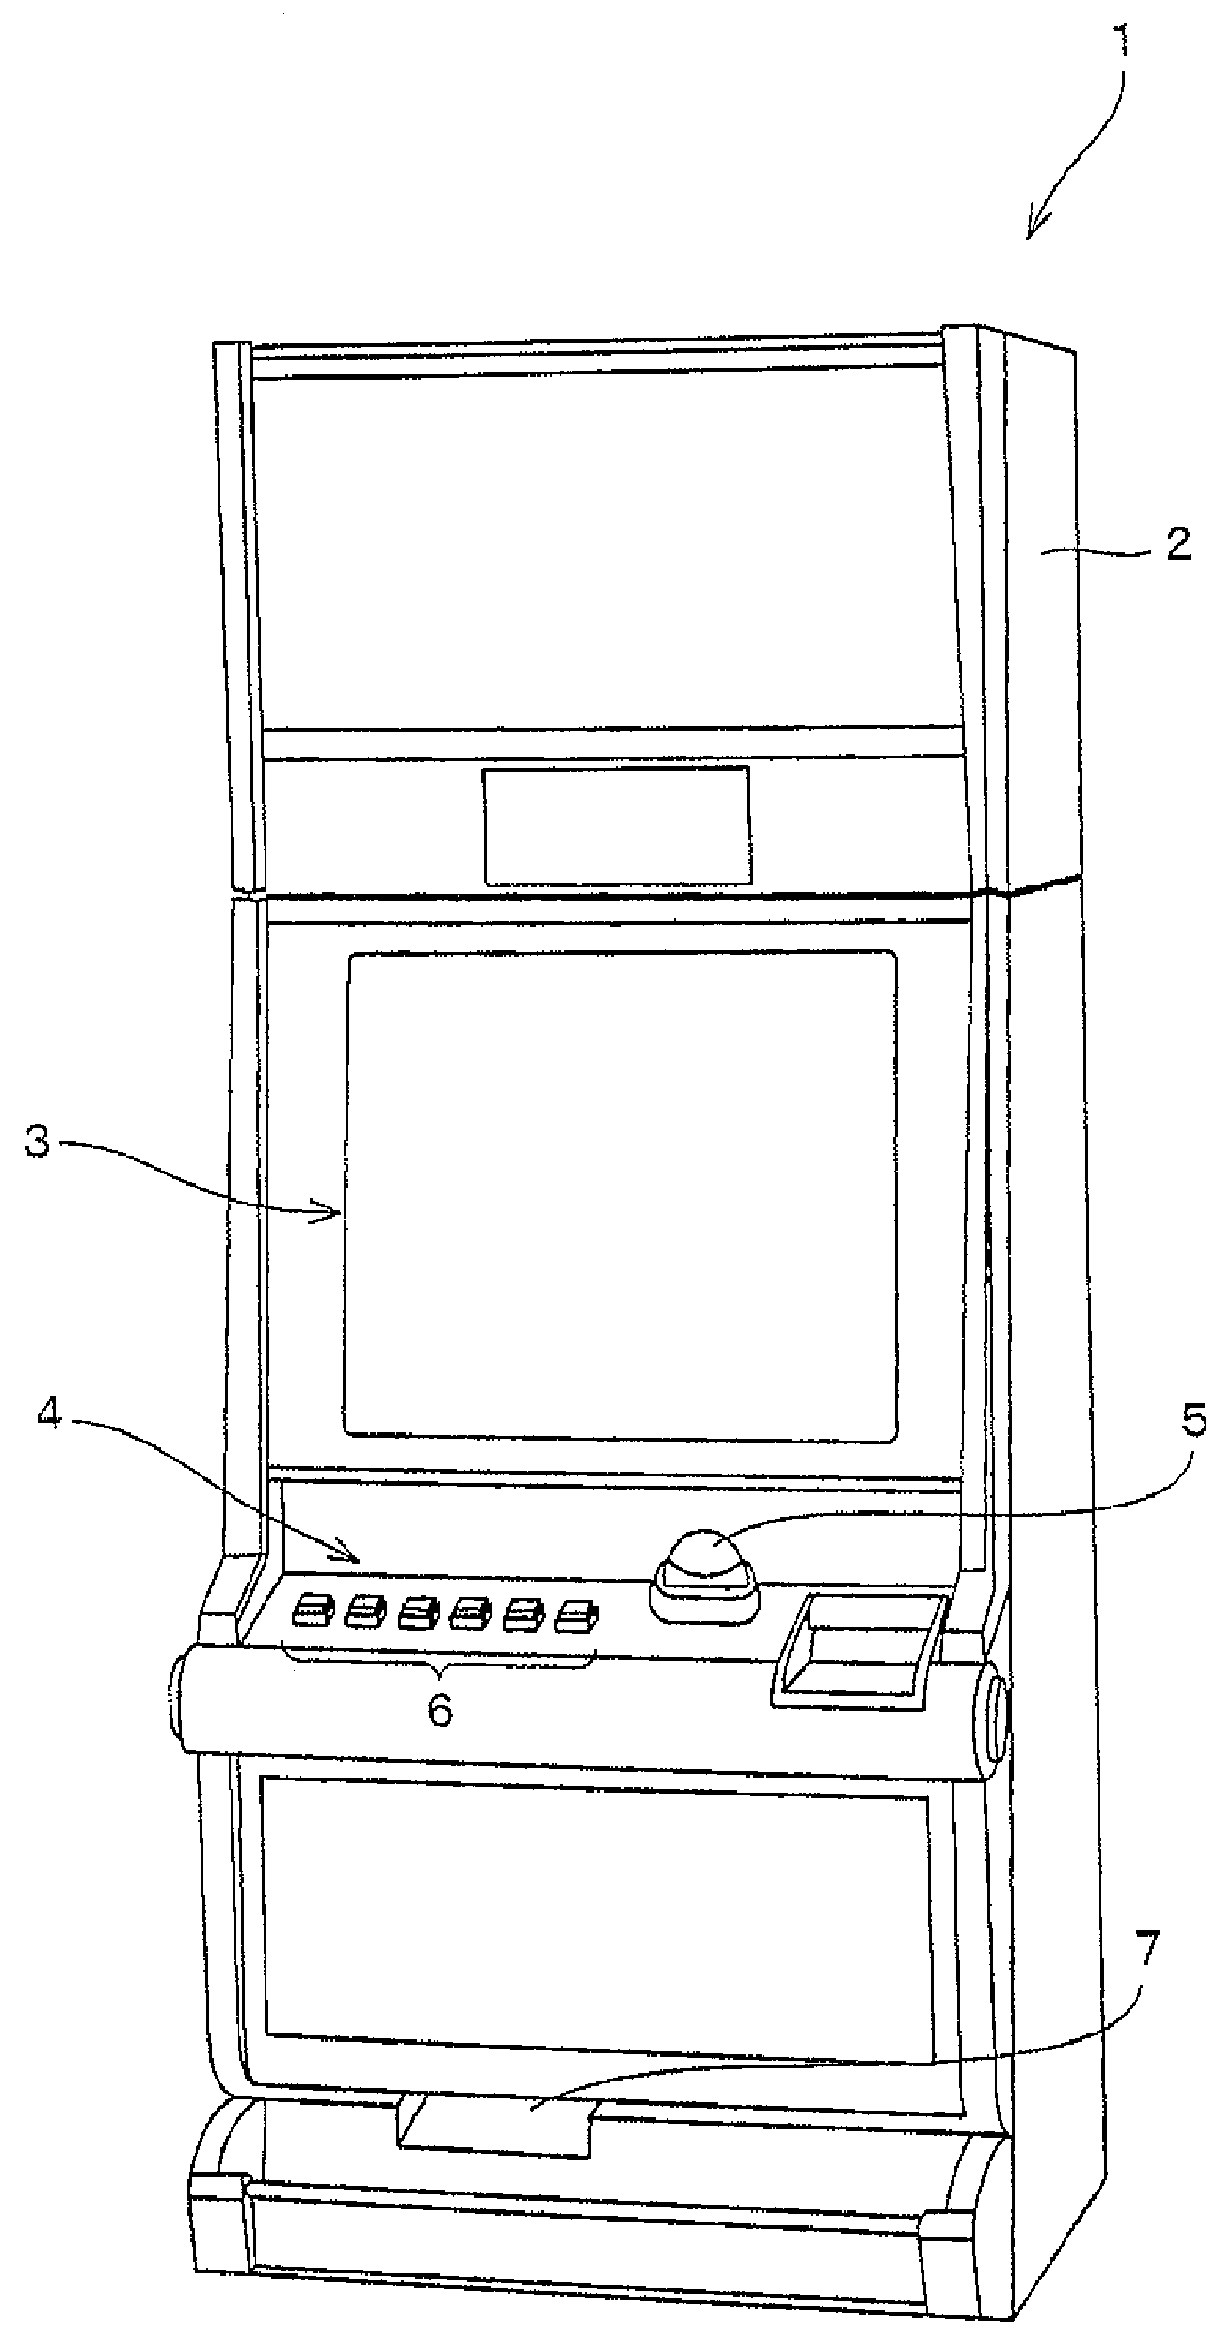 Game machine, control method for use in the game machine, and computer program